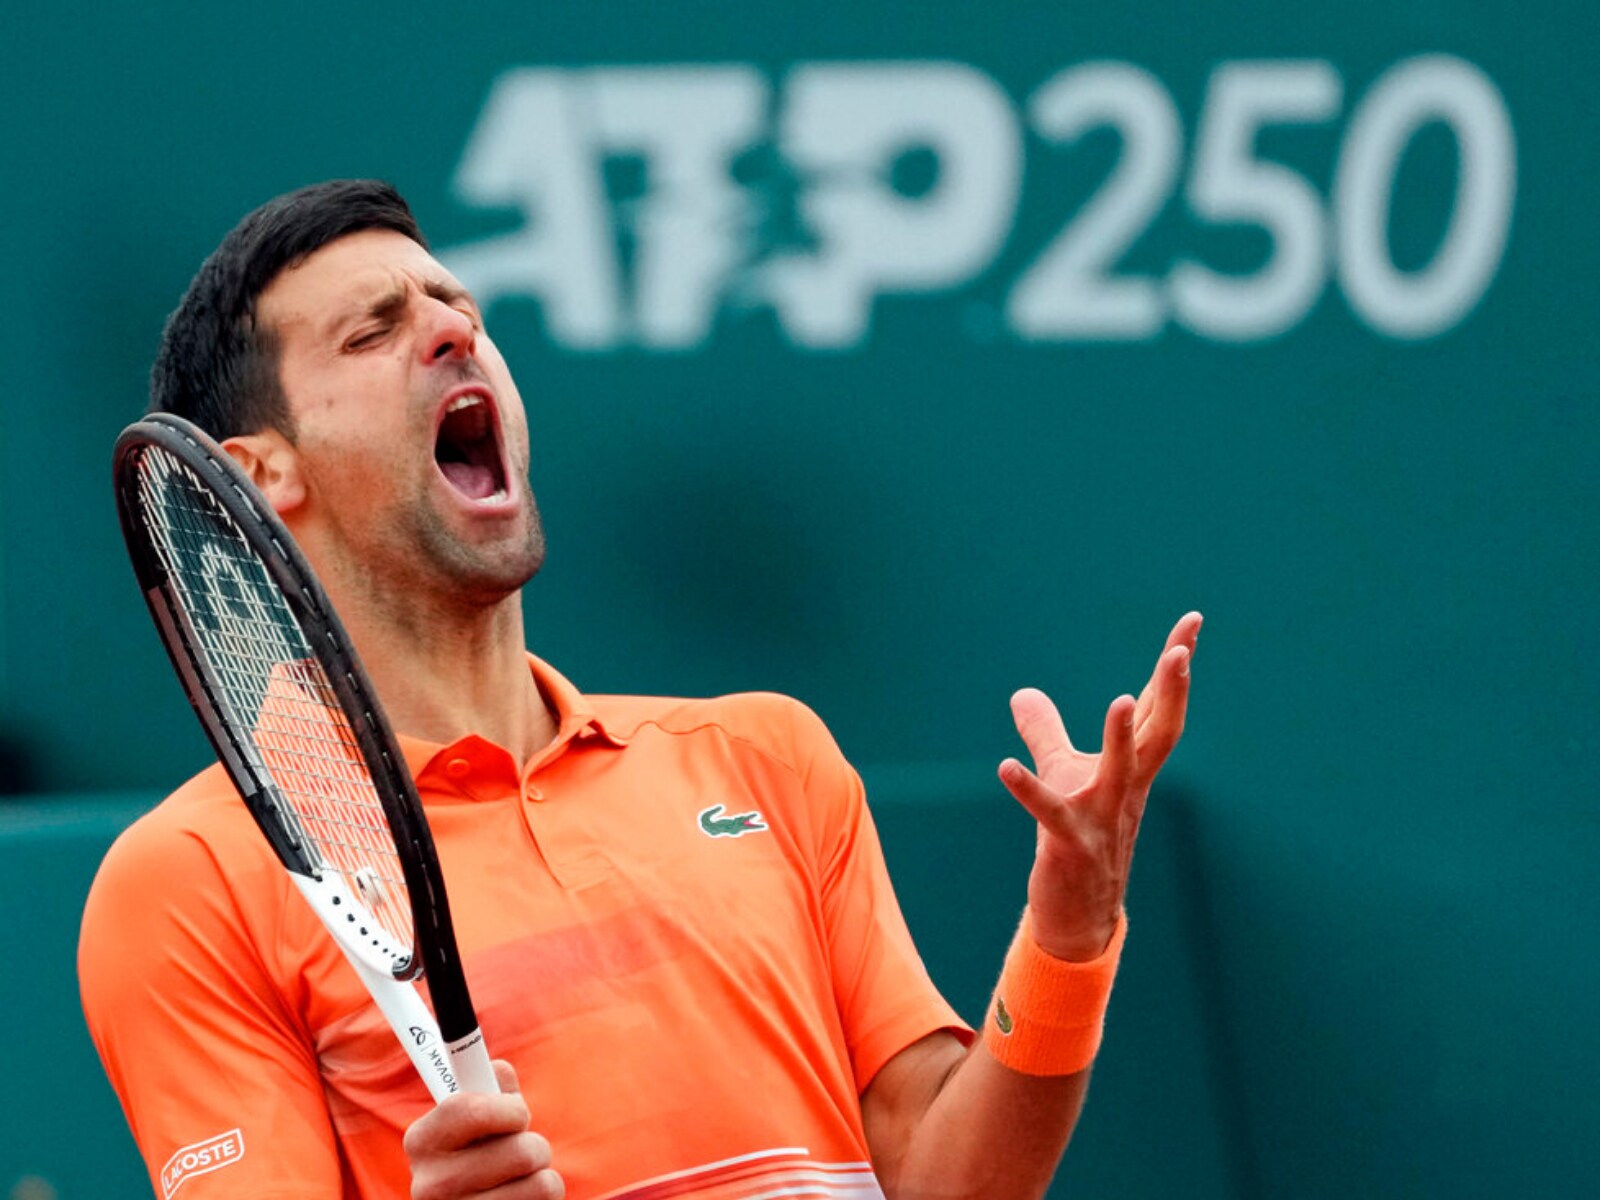 Canadian Open Novak Djokovic Officially Out of Montreal ATP Event Over Vaccination Status